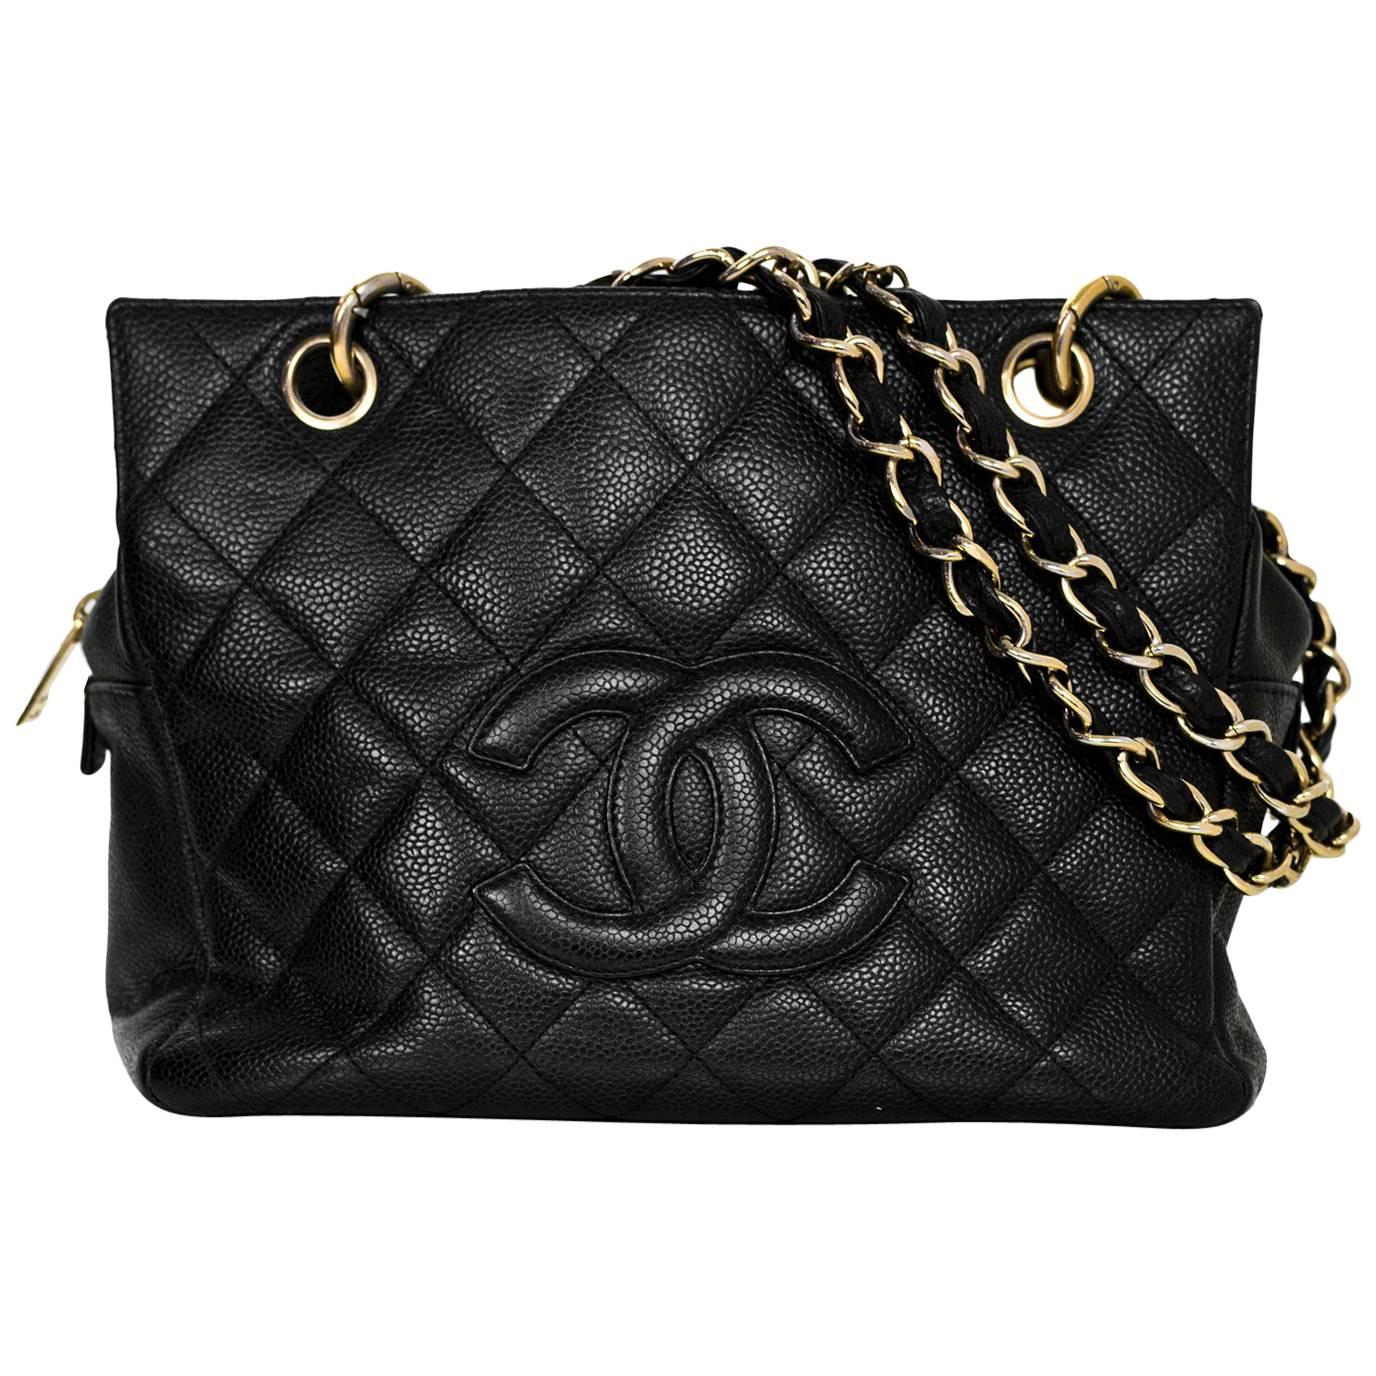 Chanel Black Caviar Leather Quilted Petite Timeless Tote PTT Bag